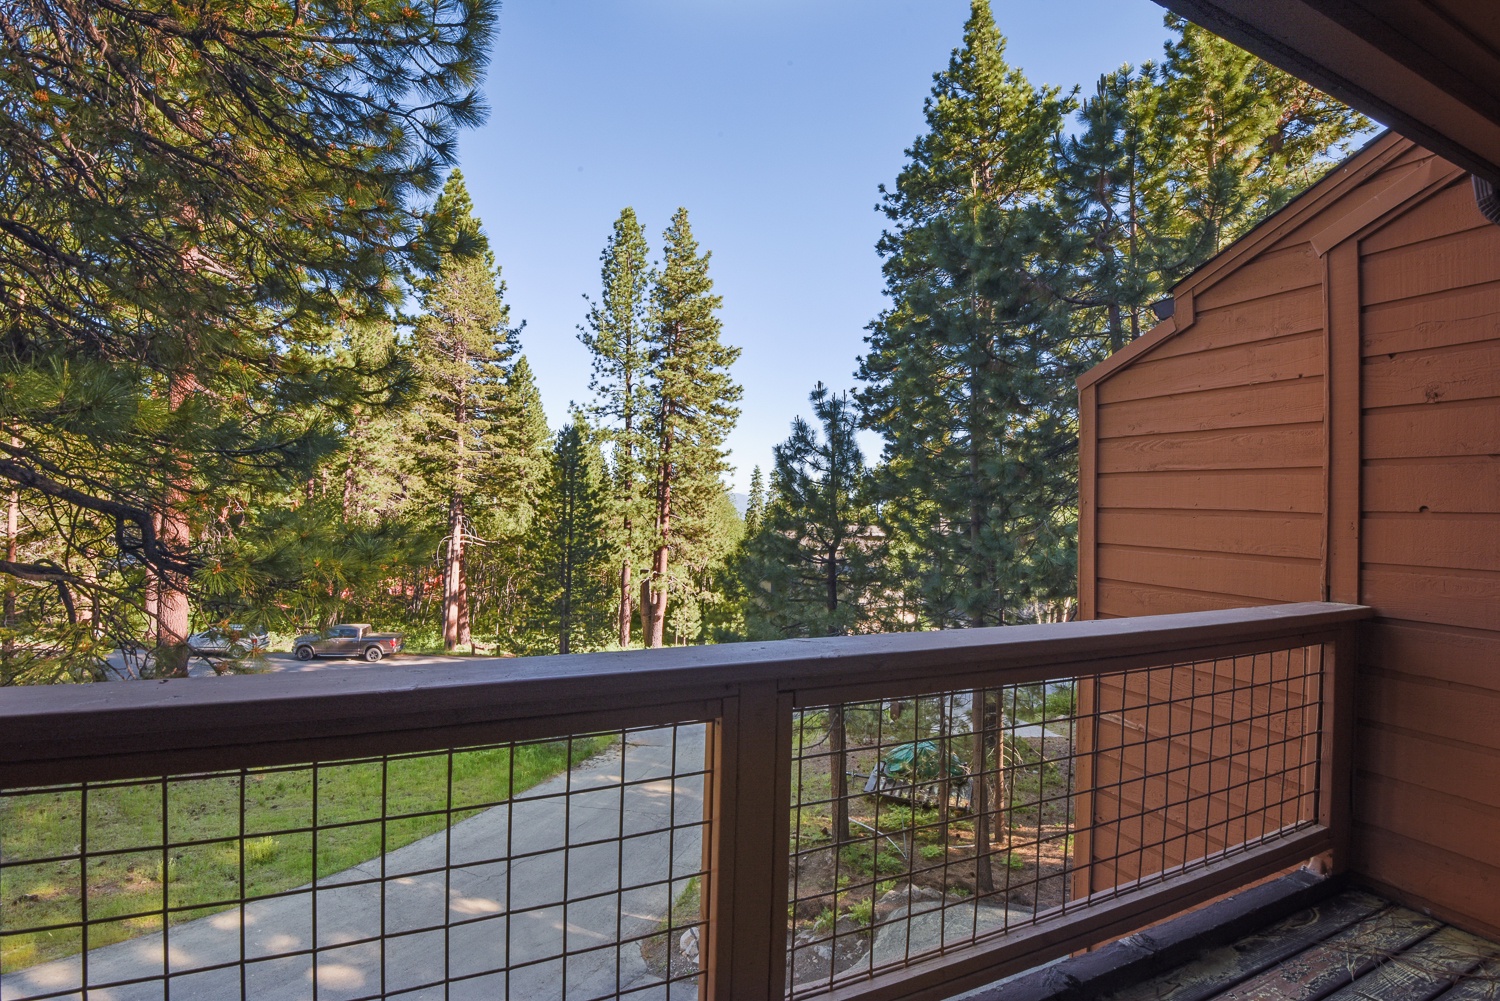 Unit #3: Take in the gorgeous nature views from both of this home’s balconies